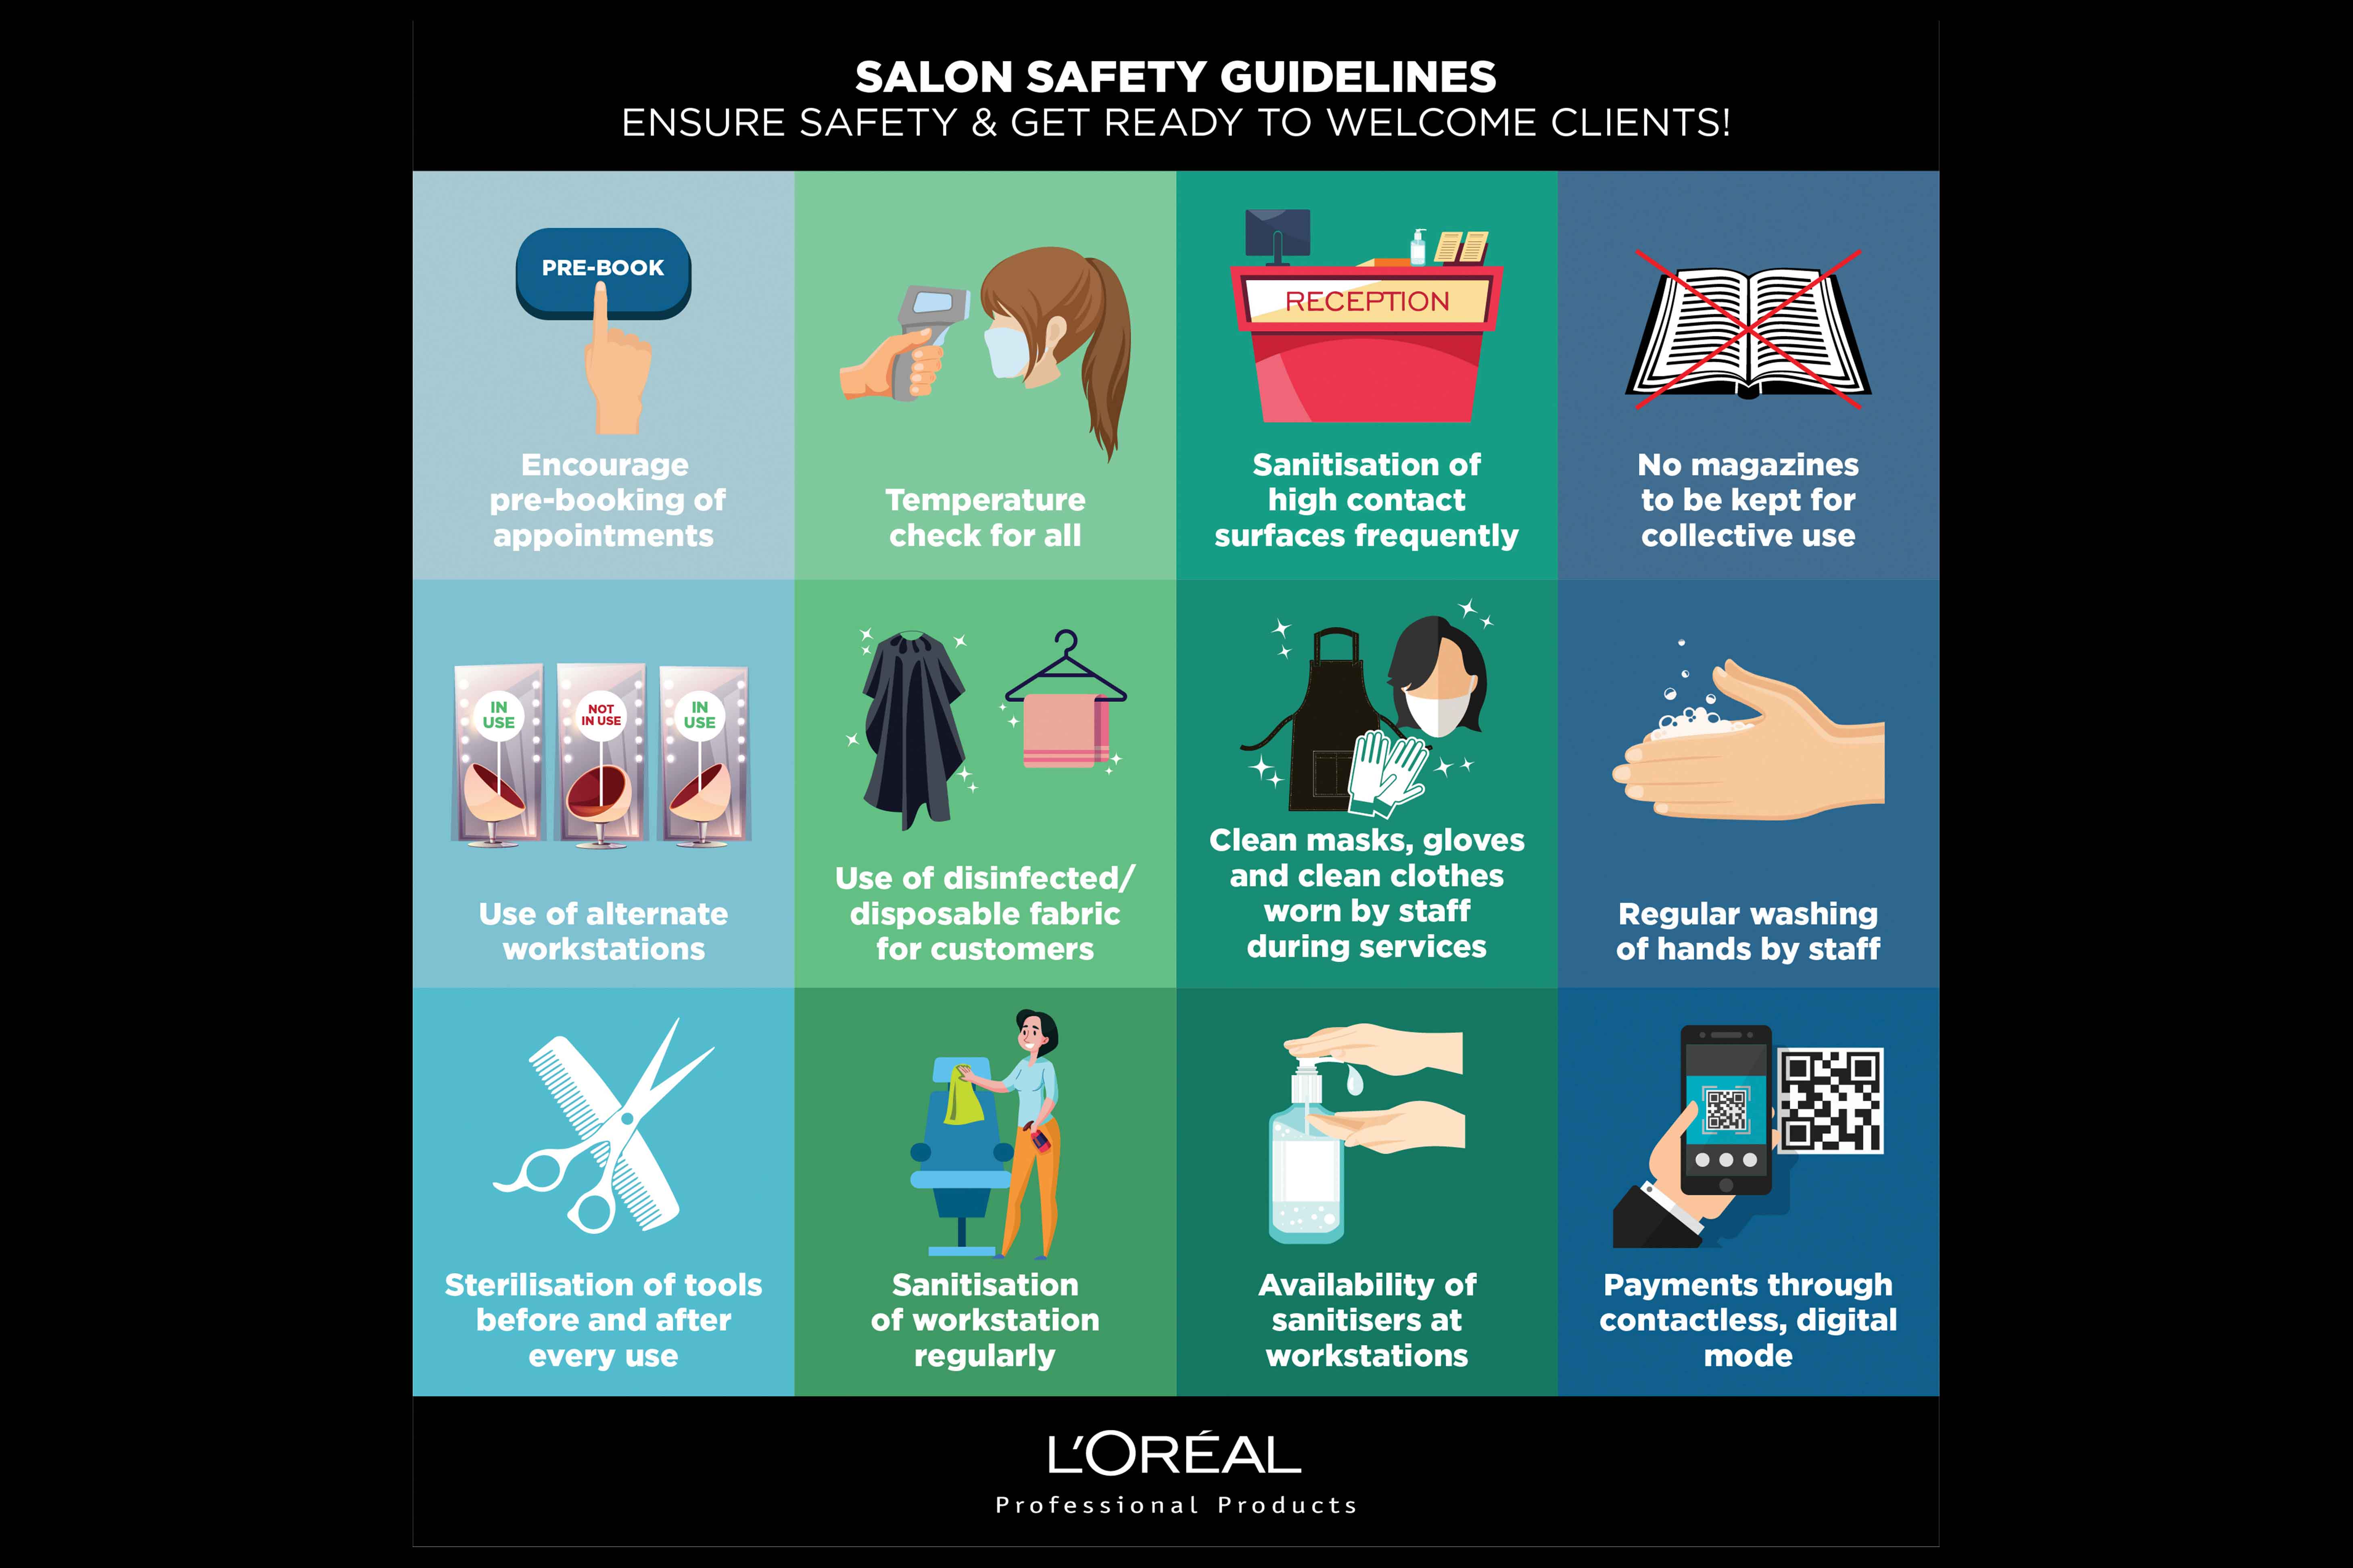 importance of personal presentation hygiene and conduct in a salon